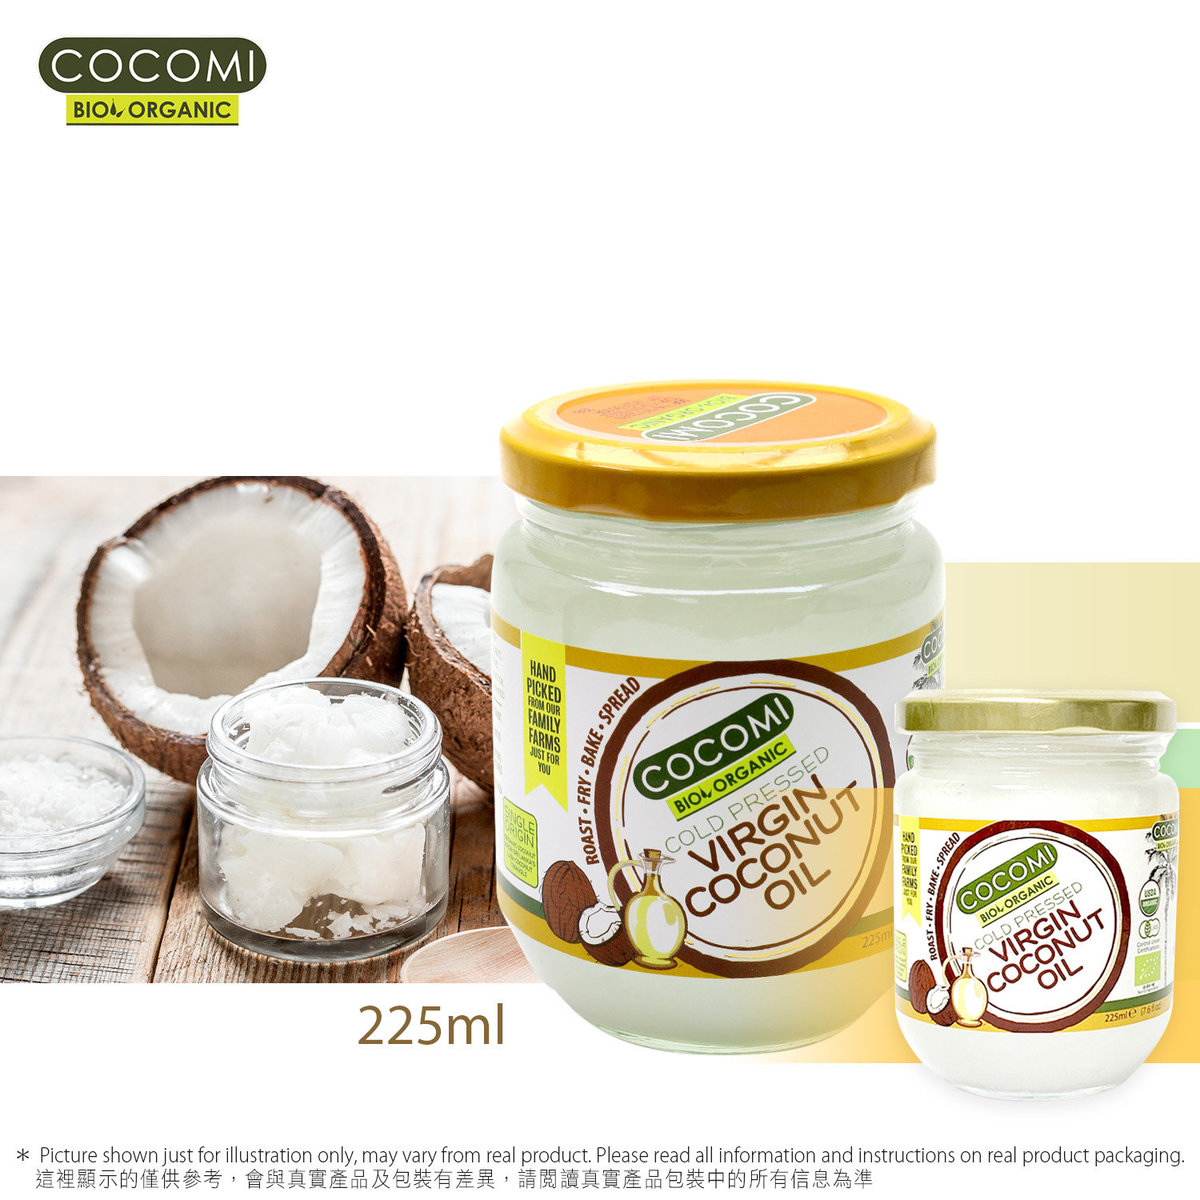 Organic Virgin Coconut Oil(Cold Press)-225ml (This product have two different versions of packing)